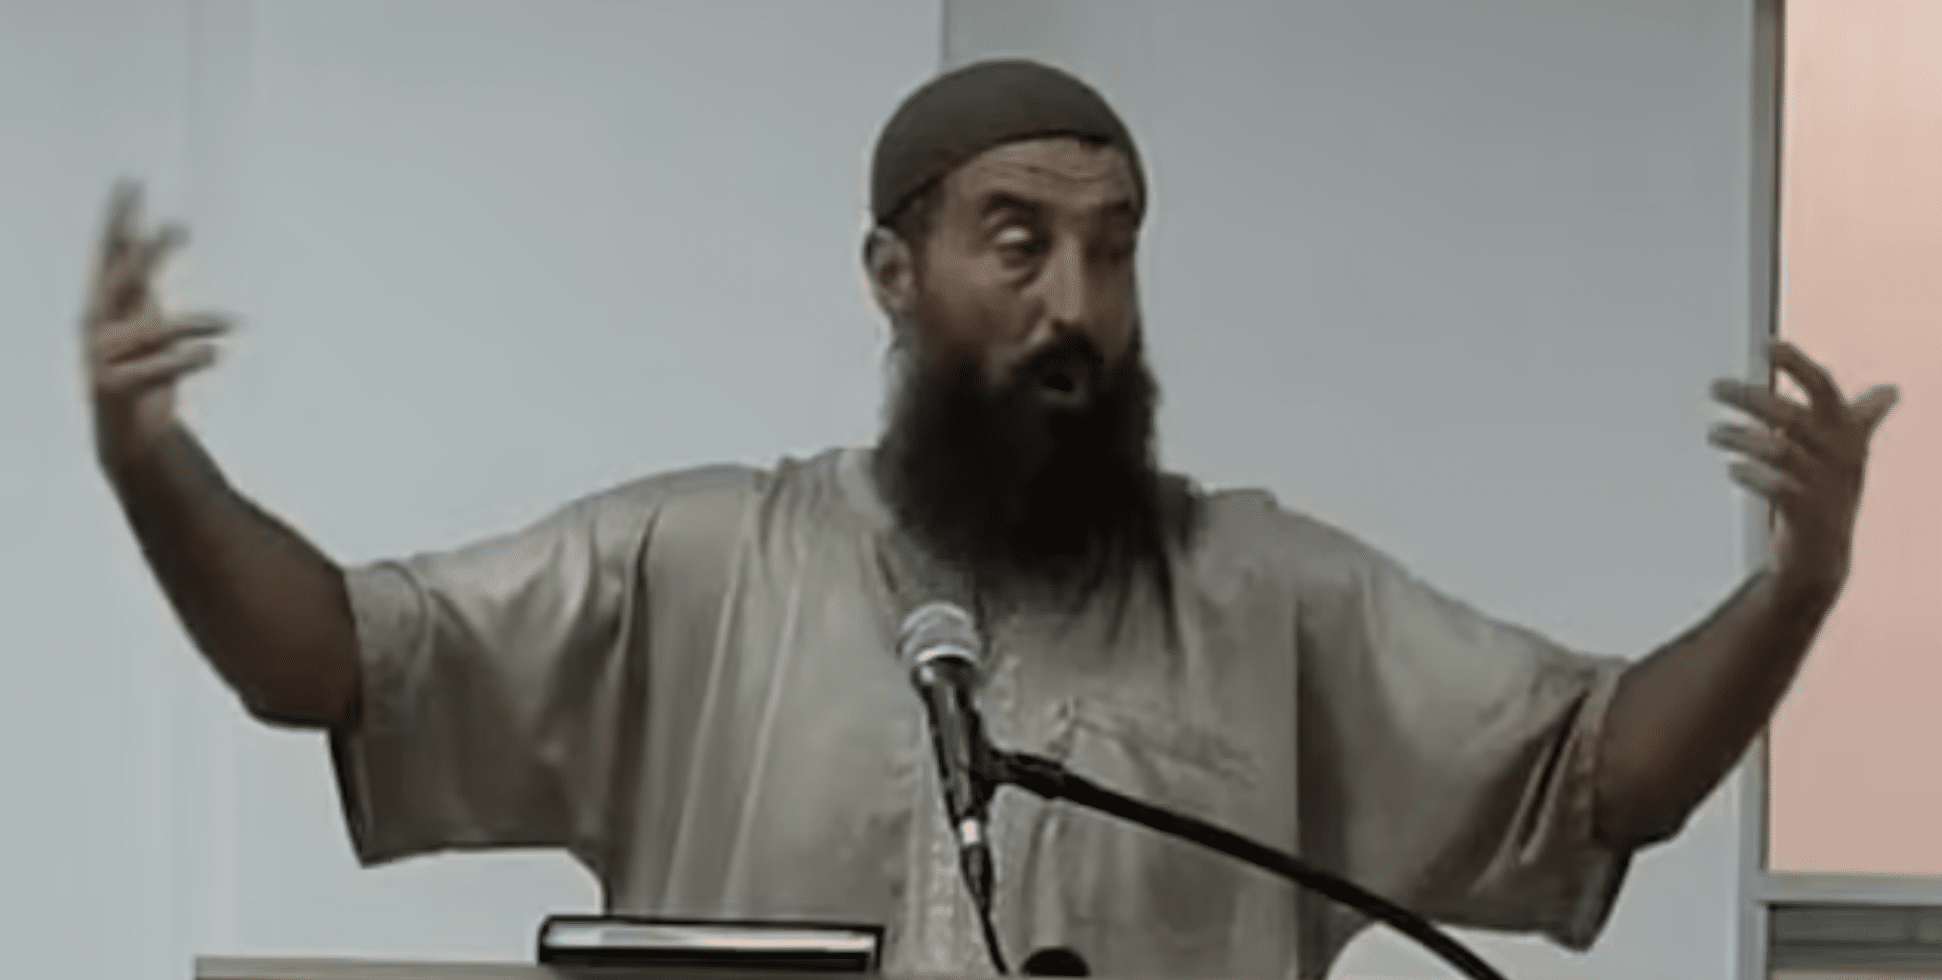 (WATCH) Radical Islamic preacher calls for a ‘final solution’ carried out by a Muslim army in shocking anti-Israel sermon in Sydney